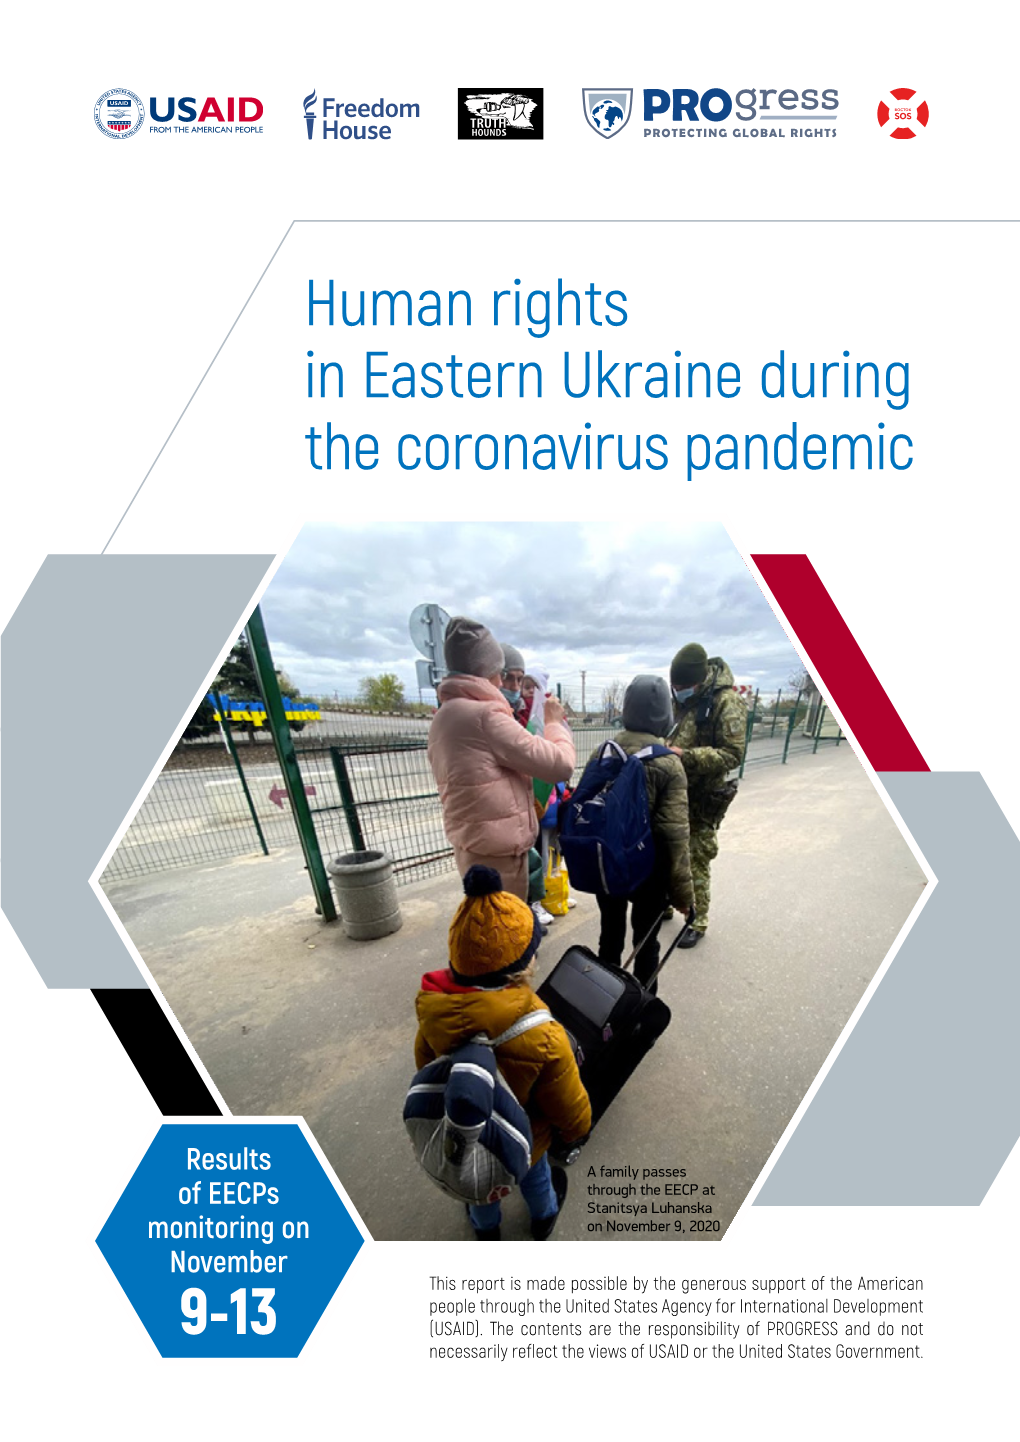 Human Rights in Eastern Ukraine During the Coronavirus Pandemic 9 Results of Eecps Monitoring on November 9-13